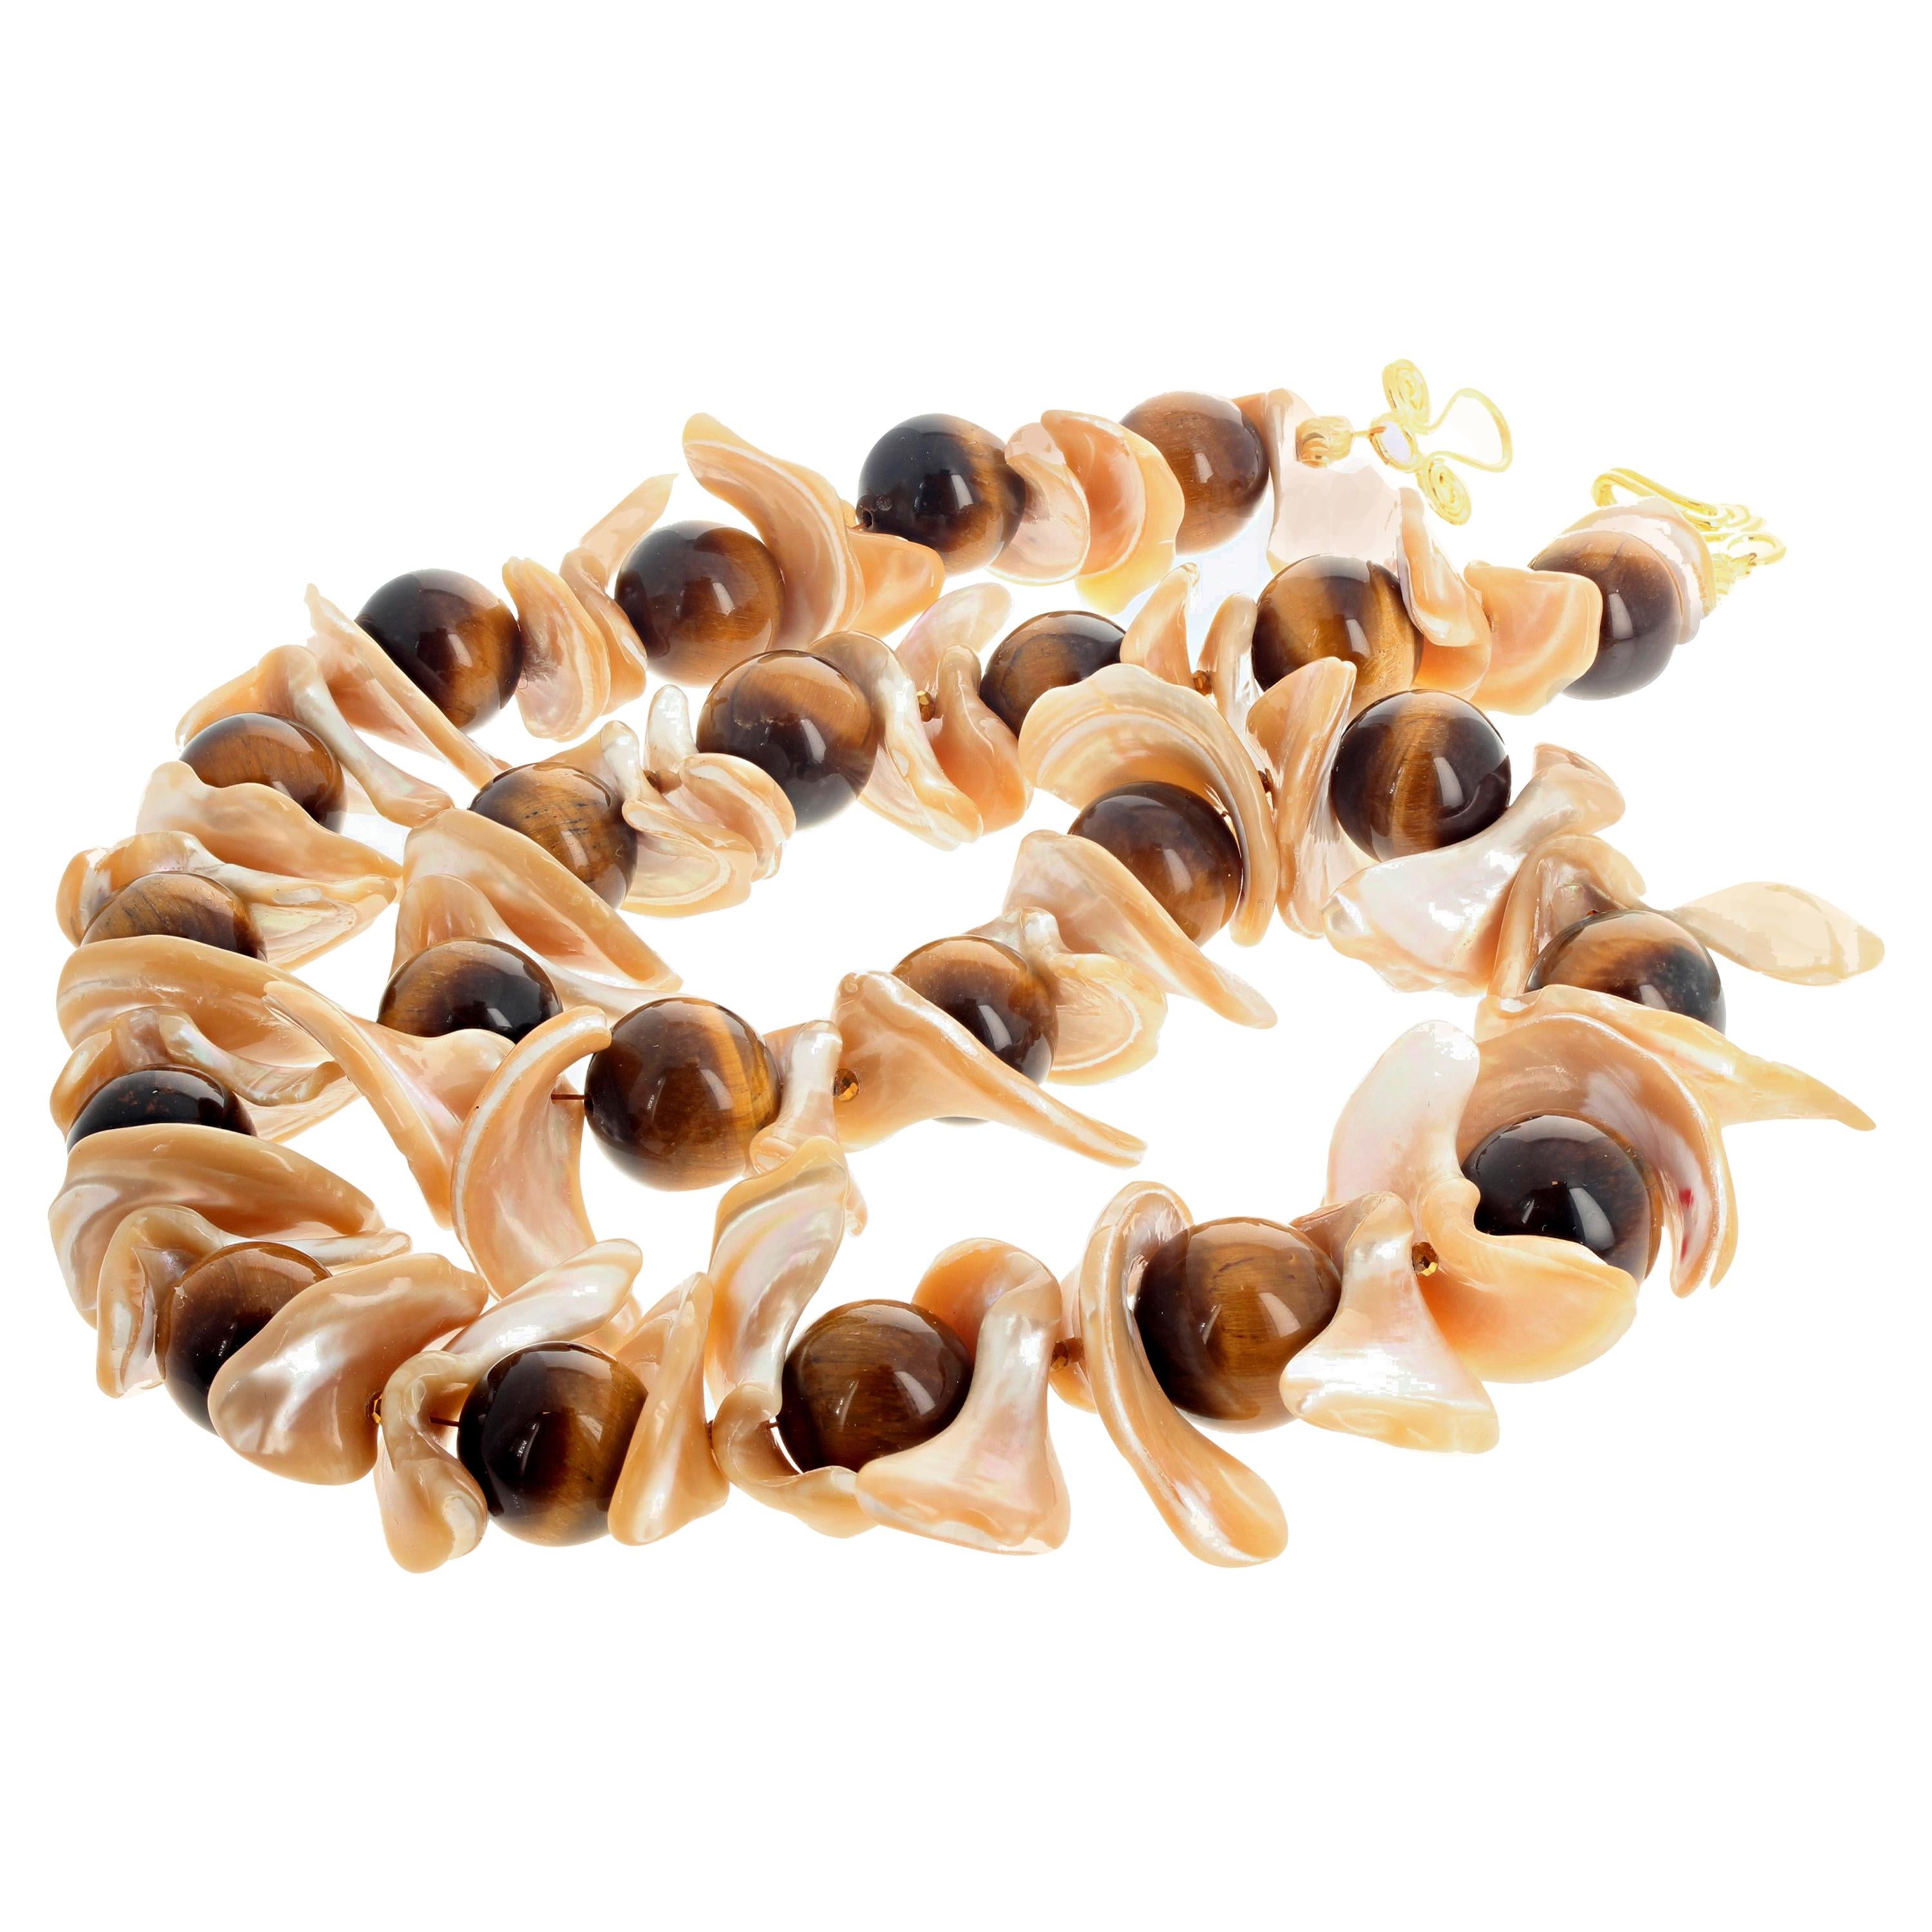 Huge floppy flippy natural glowing Pearl shells hug these beautiful natural highly polished Tiger Eye in this 28 inch long necklace with easy to use gold plated hook clasp.  The Tiger Eye are approximately 17 mm round.   If you wish faster delivery